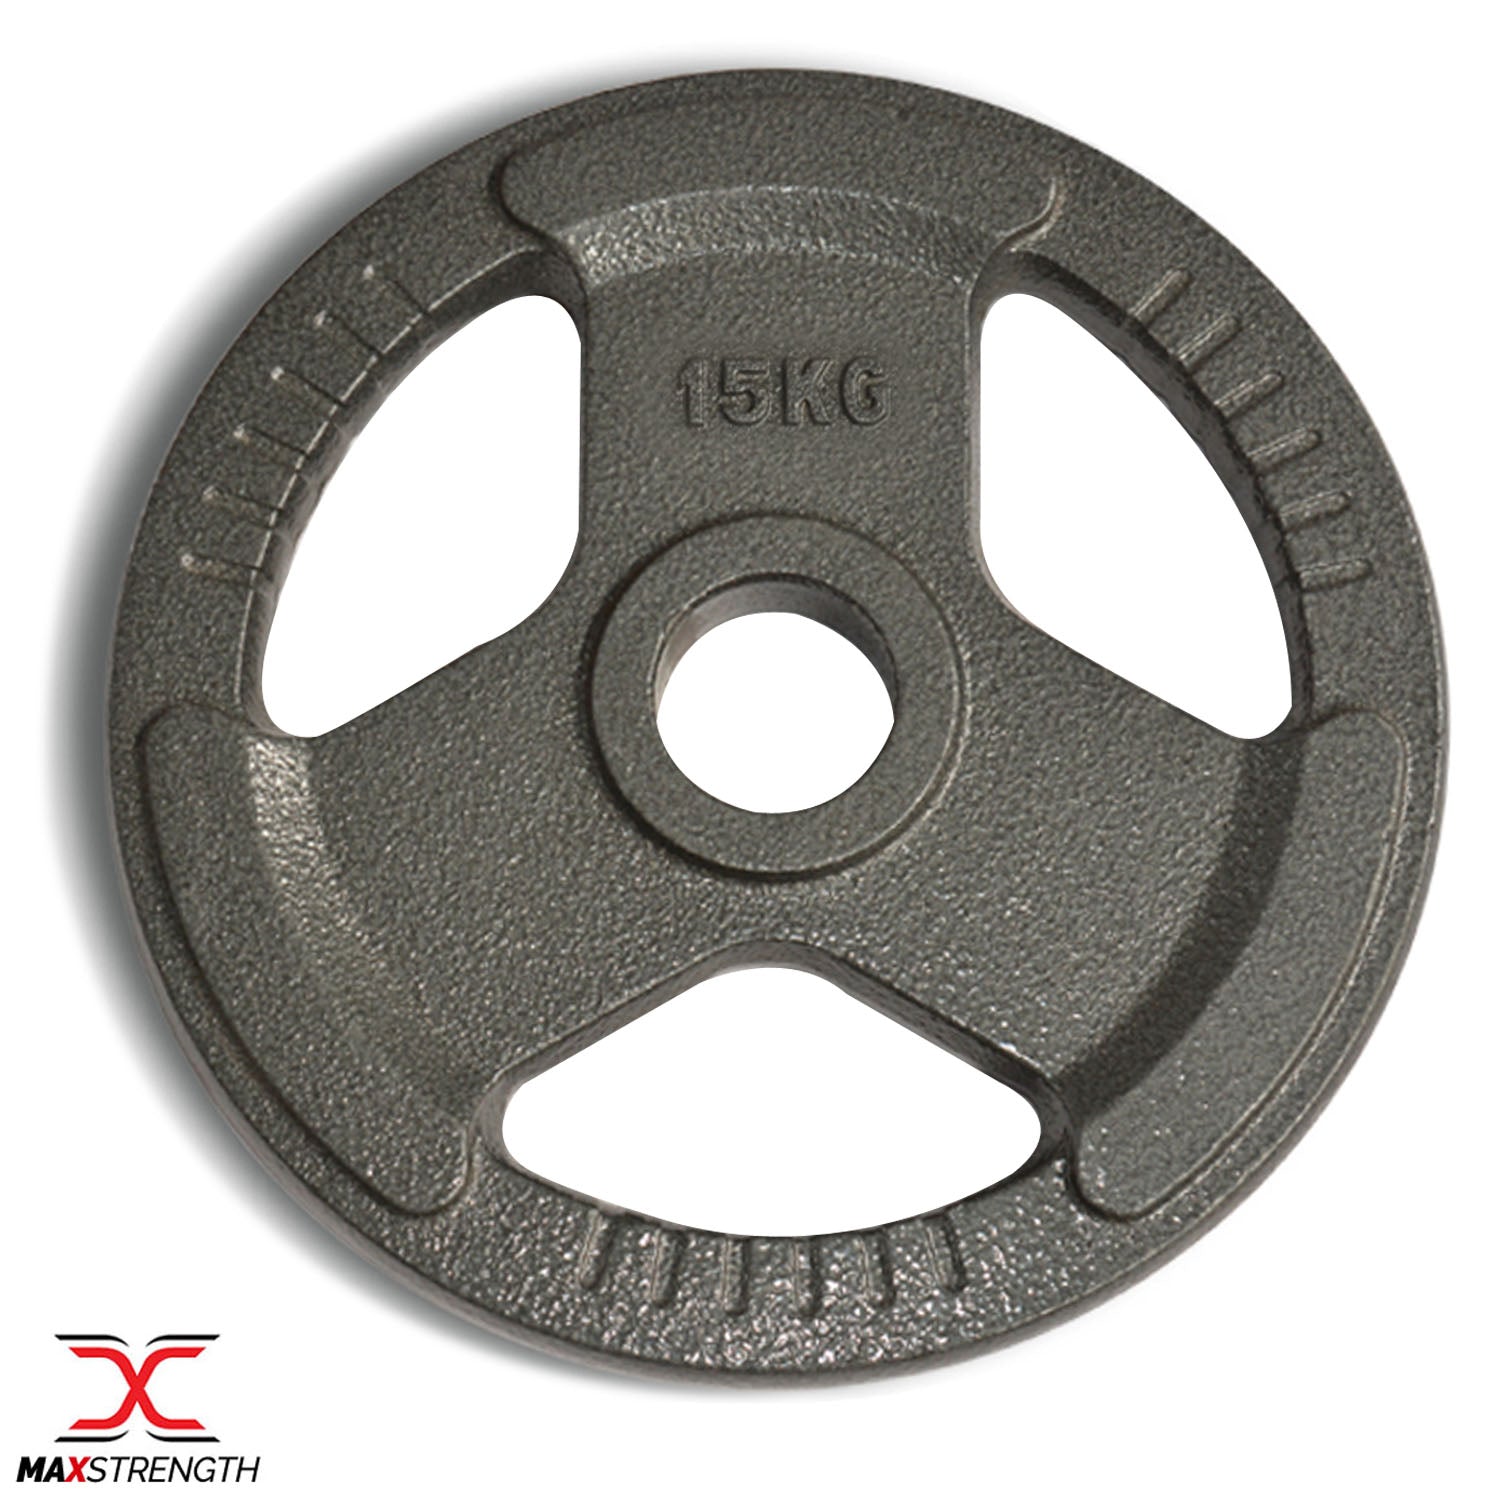 Weightlifting Barbell Plates